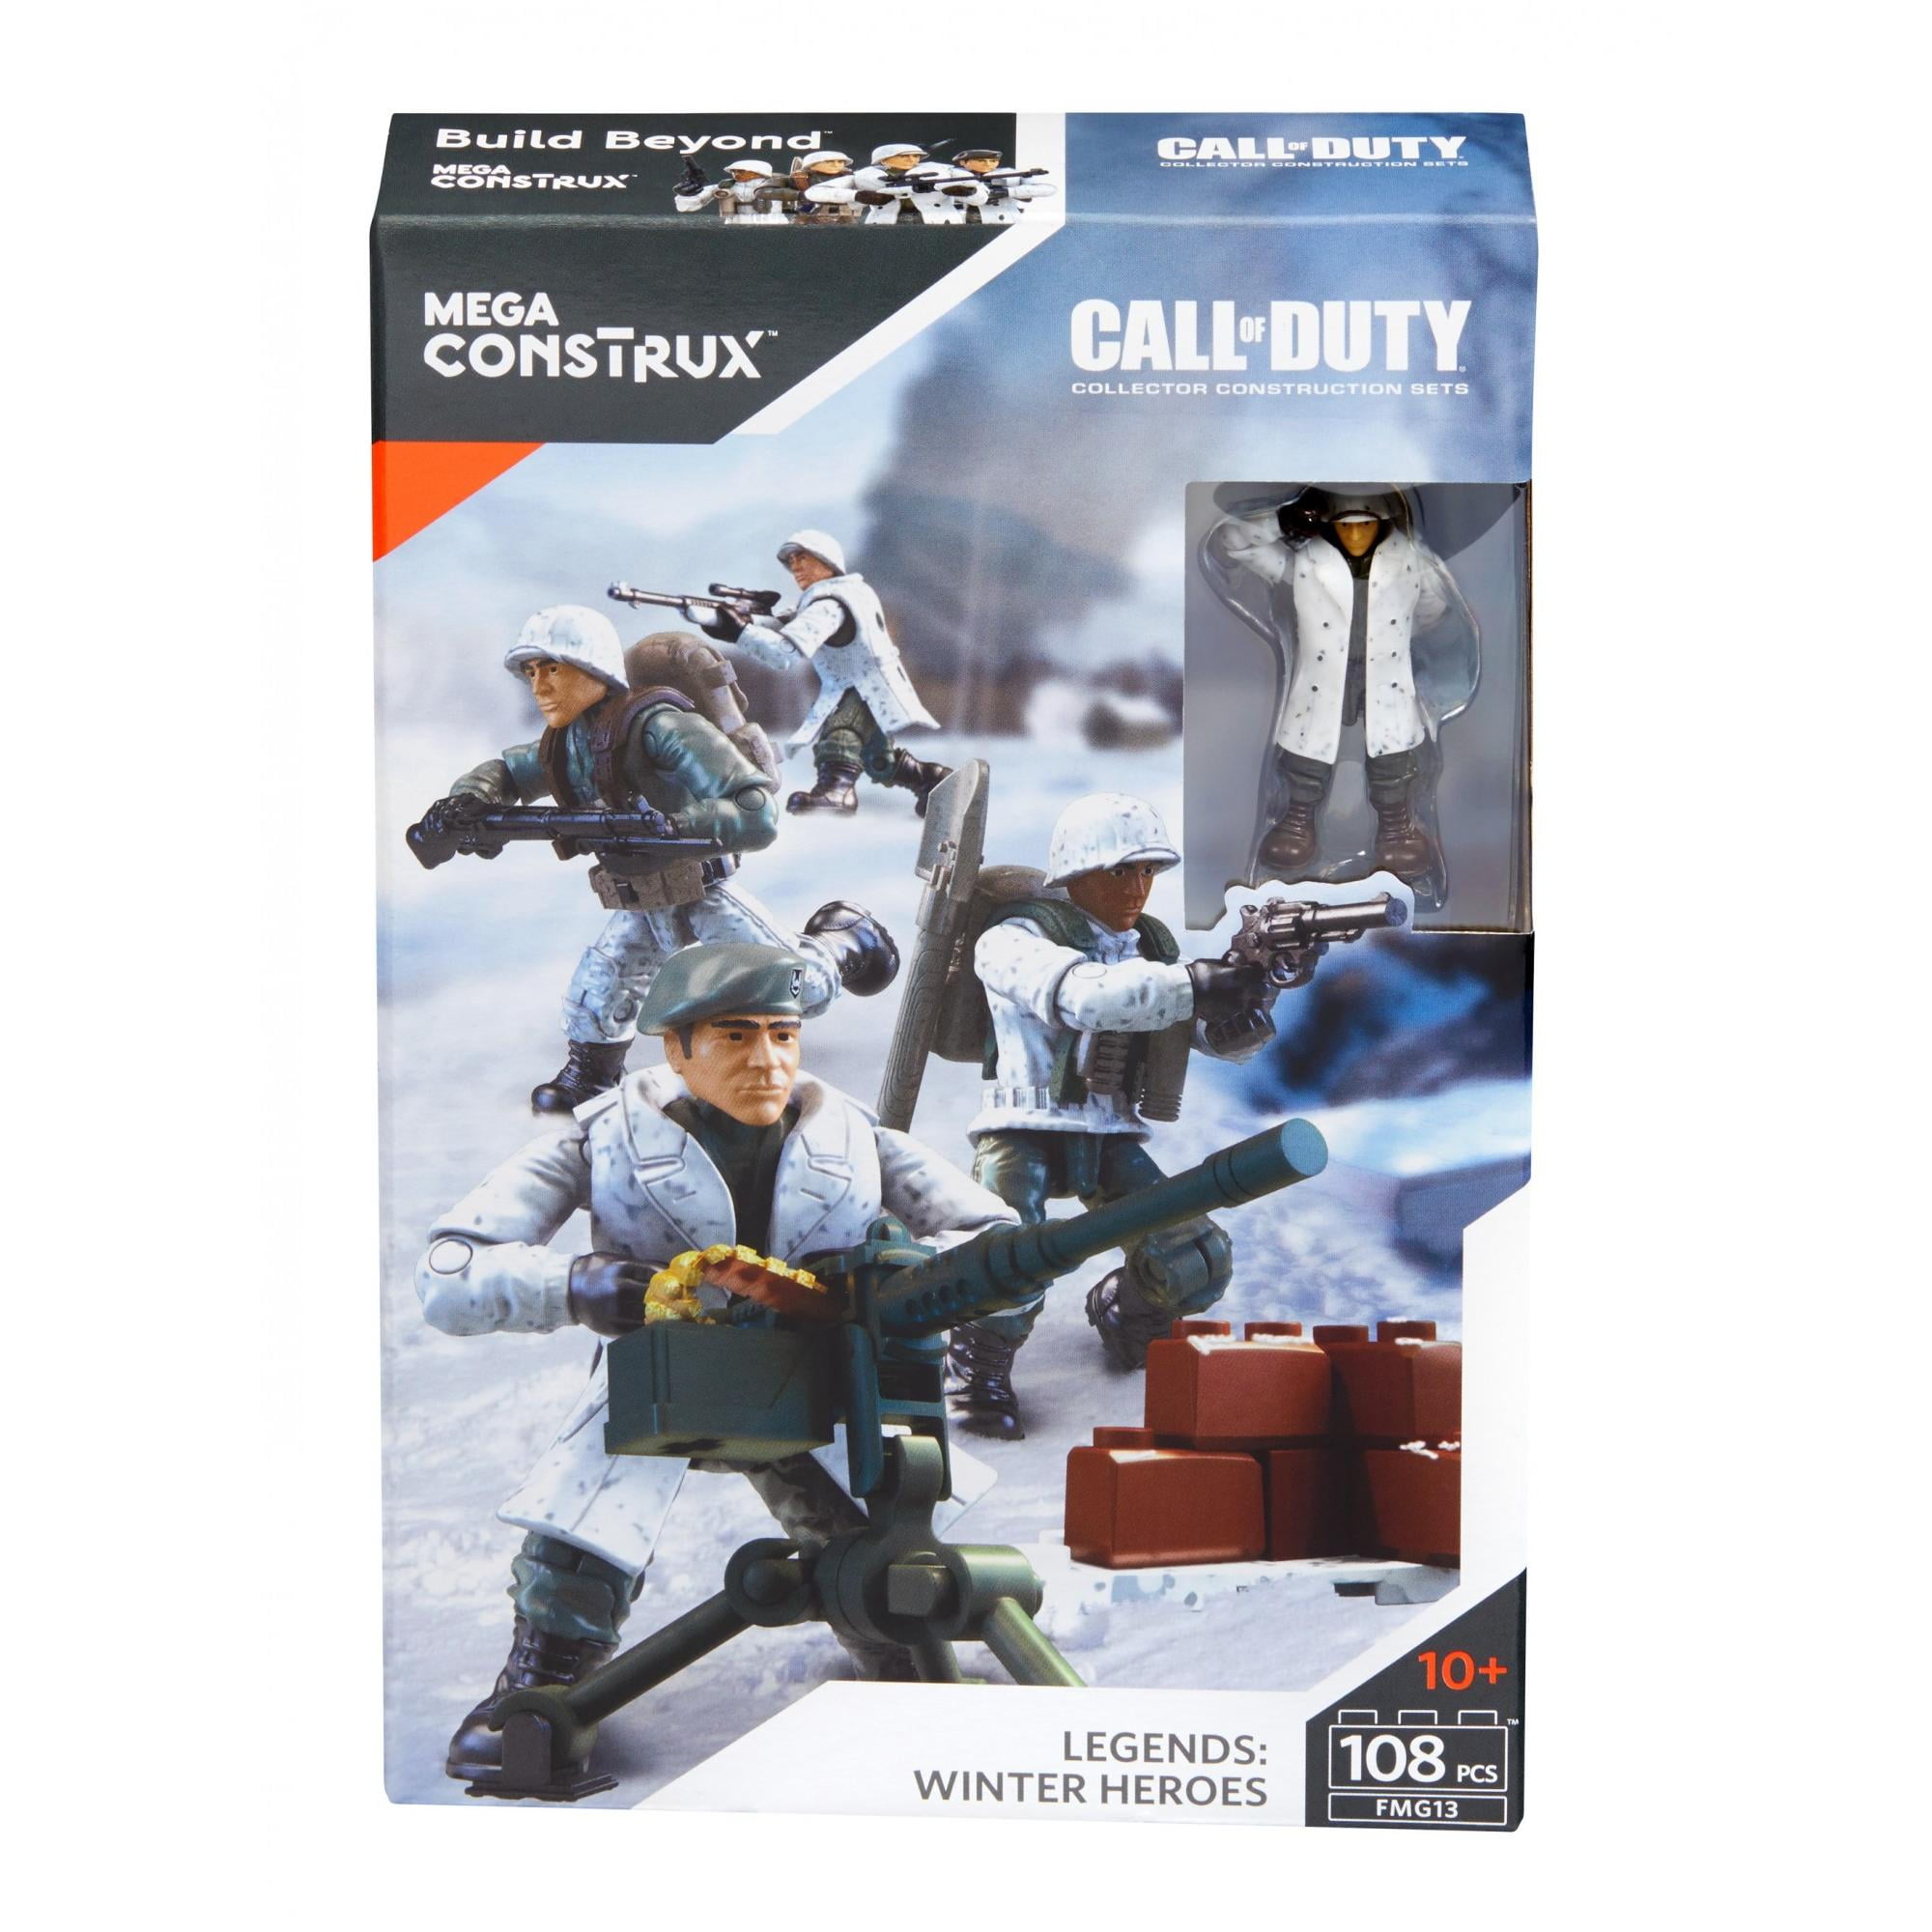 CALL OF DUTY 52PC MILITARY & 50PC TROPICAL  BOOSTER PACKS MEGA CONSTRUX  w88 